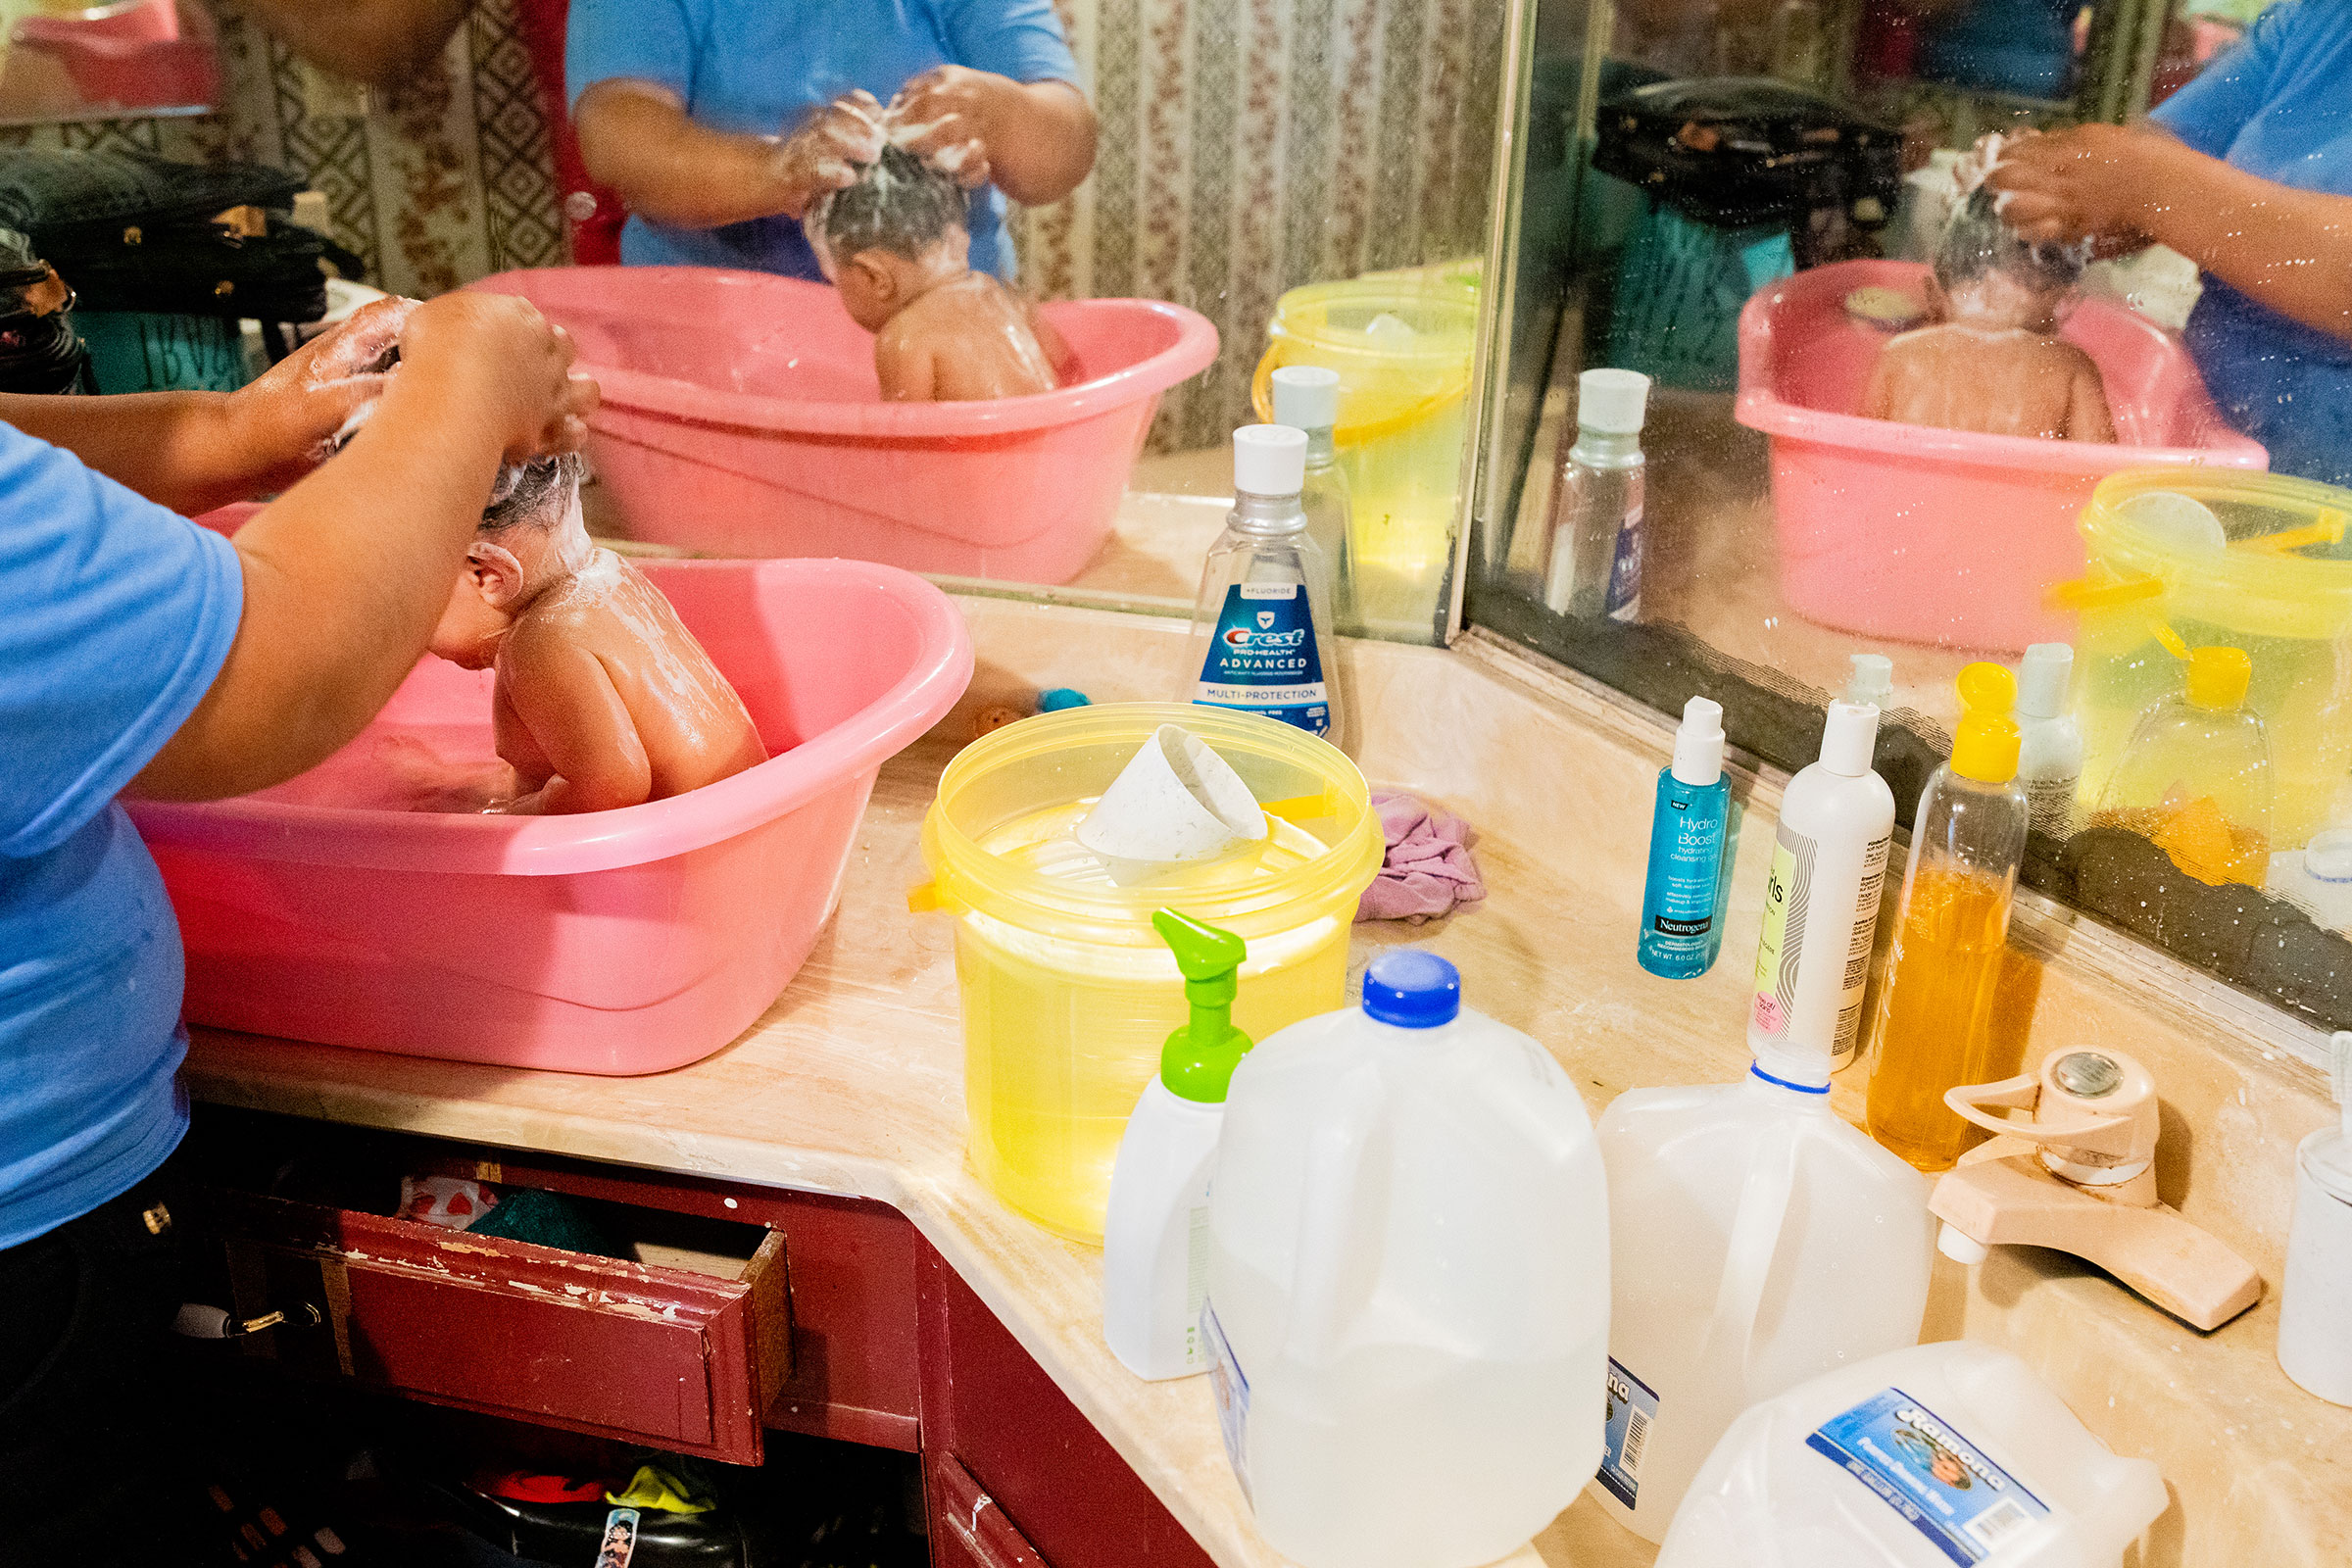 Cecilia Cruz bathes her daughter Daleyda with bottled water that she preheated beforehand inside the family’s trailer at the Oasis Mobile Home Park in Thermal, Calif. on June 25. In 2019 the Environmental Protection Agency found that the park’s water was contaminated with arsenic at nearly 10 times the allowable limit and residents have since been warned not to use it for drinking, cooking, bathing, or brushing their teeth.